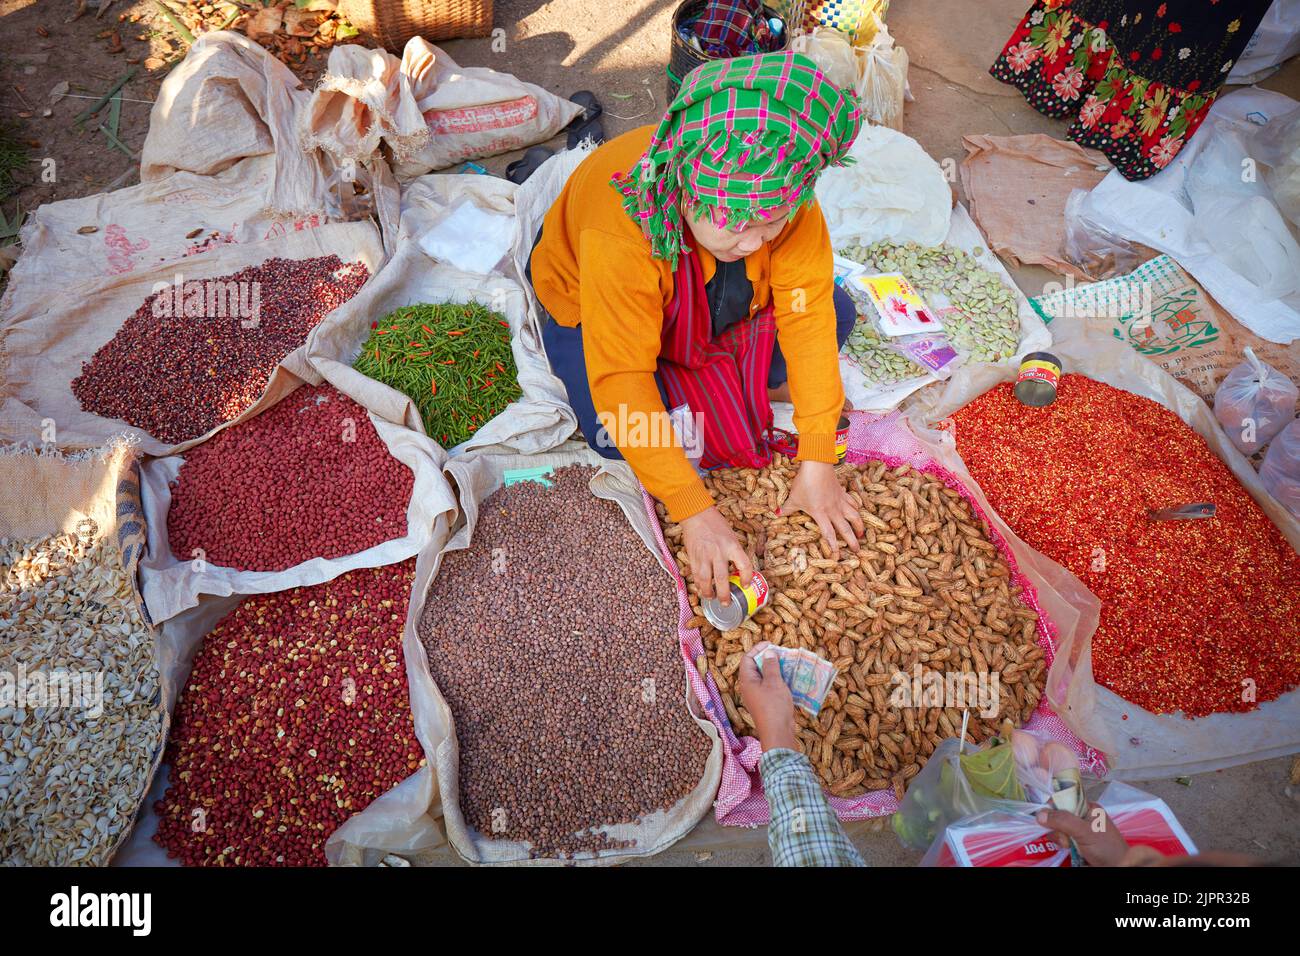 Local Burmese selling spices and dry fruits in a stand at the Phaung Daw OO Market, Inle Lake, Myanmar. Stock Photo